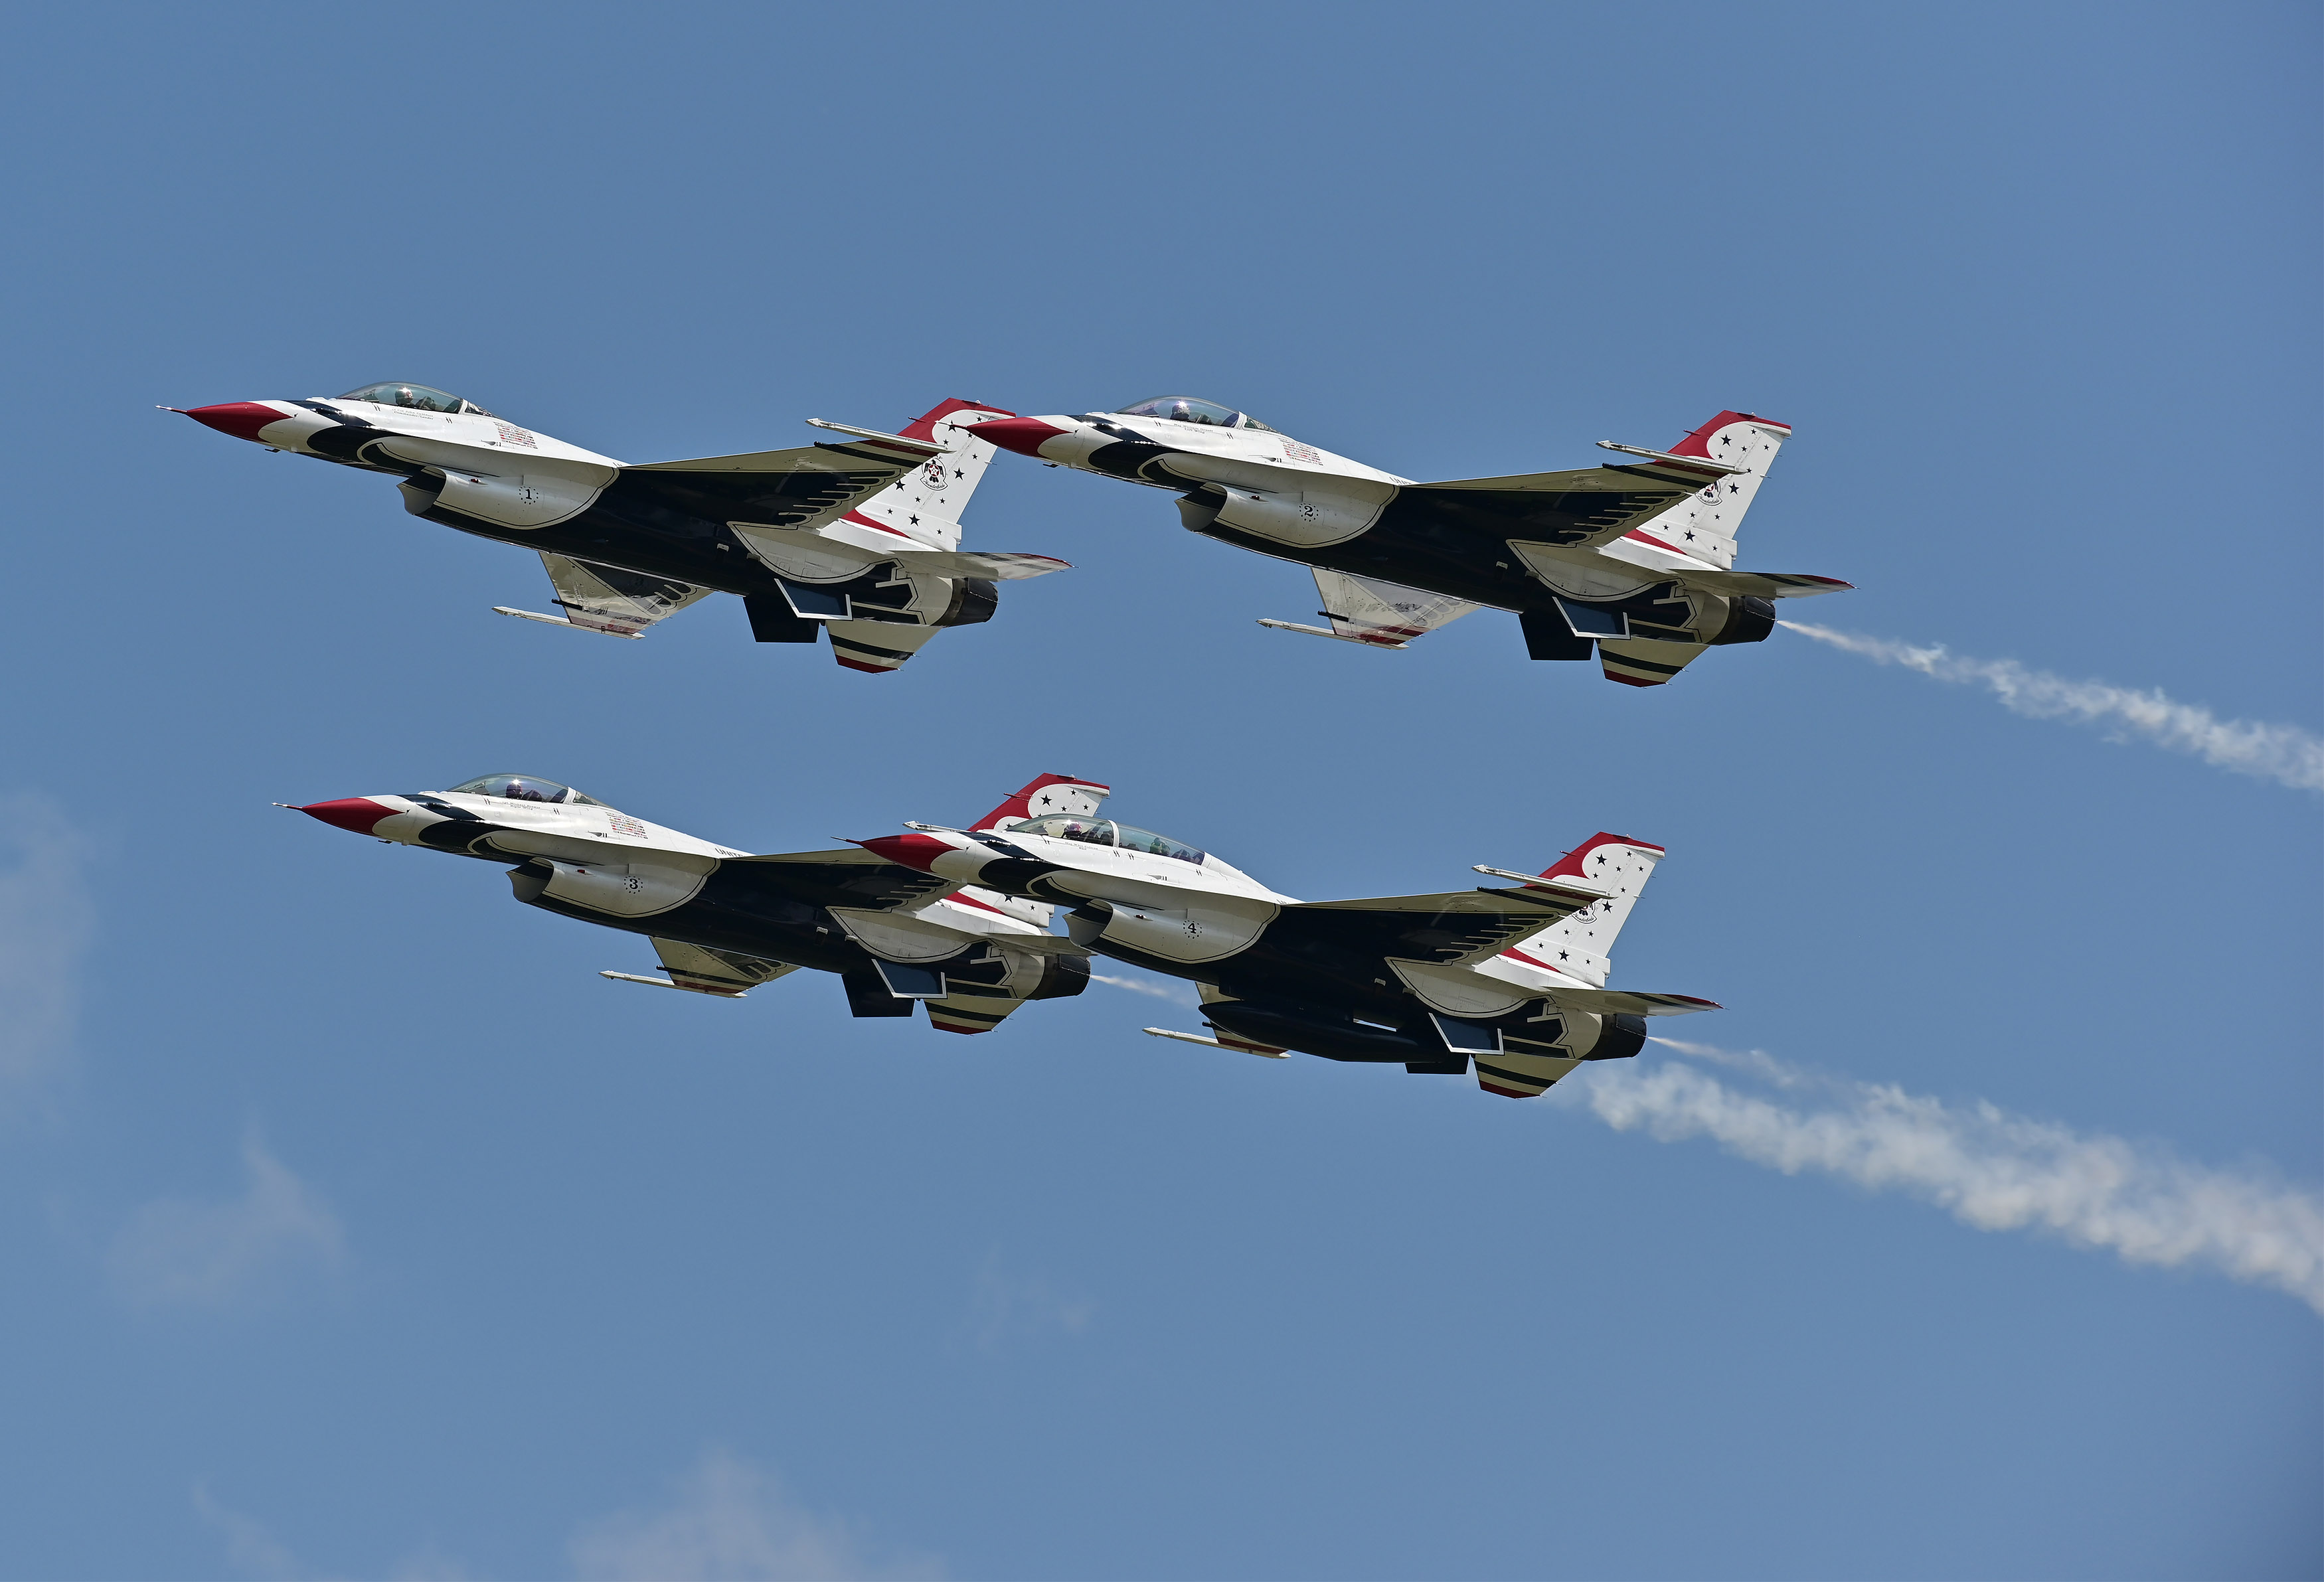 The U.S. Air Force Thunderbirds make a surprise appearance to begin the daily afternoon airshow July 25. The demonstration team is performing nearby at the Milwaukee Air and Water Show. Photo by David Tulis.